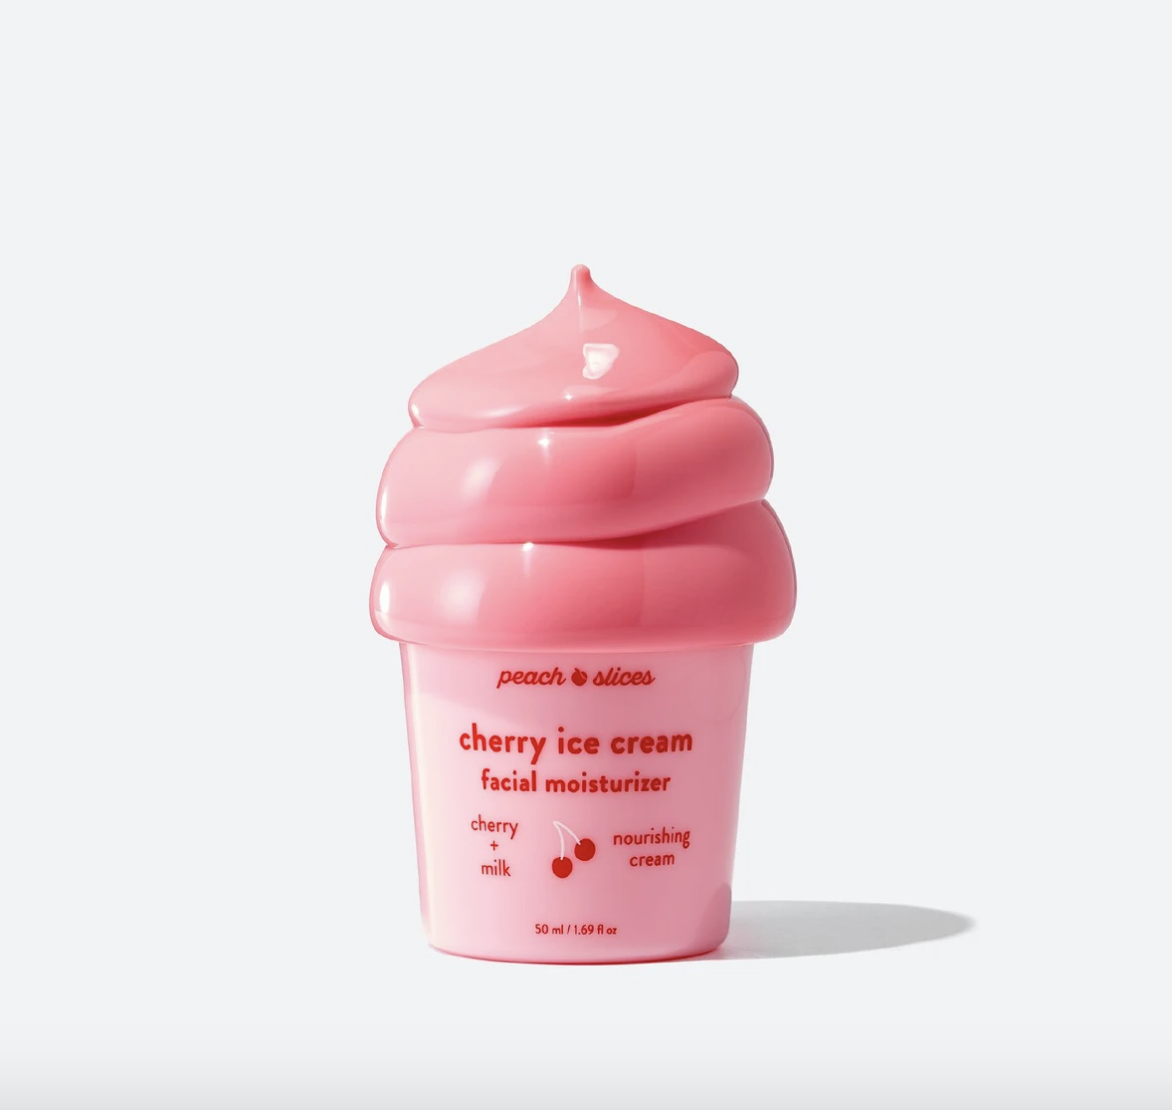 the moisturizer, which comes in an ice cream–shaped container